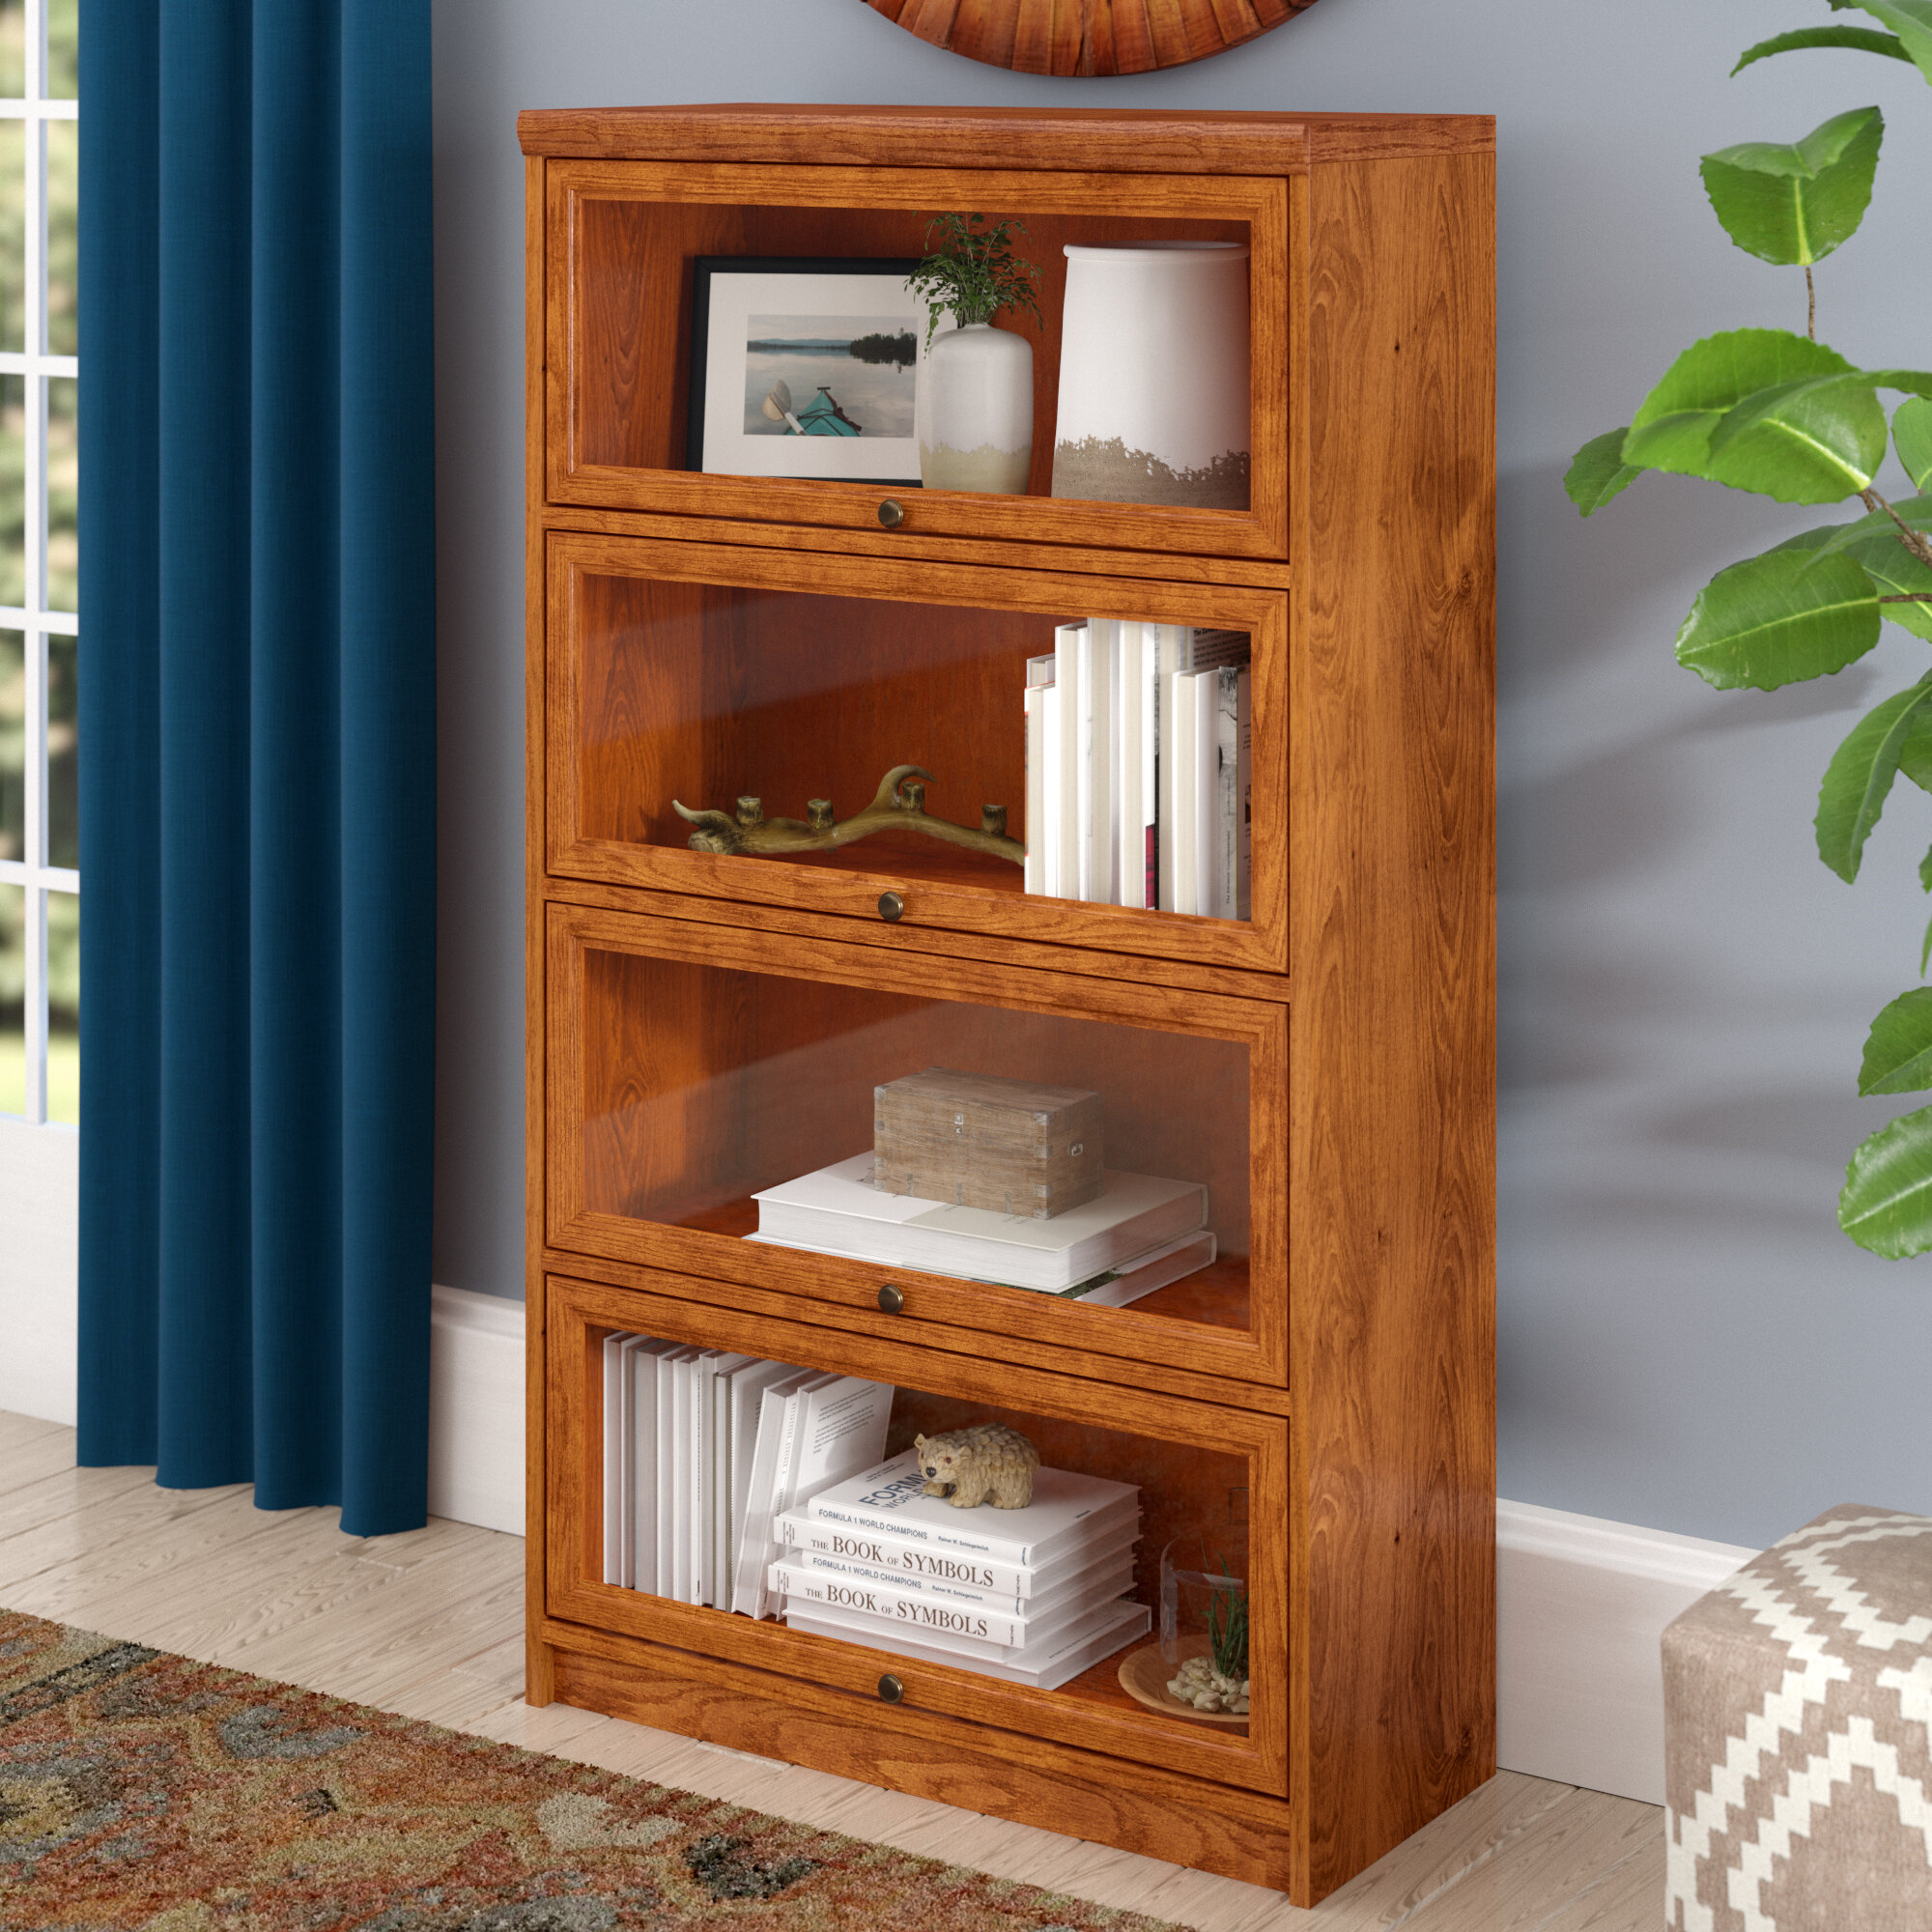 Bookcase With Glass Doors Visualhunt, Slim Bookcase With Glass Doors